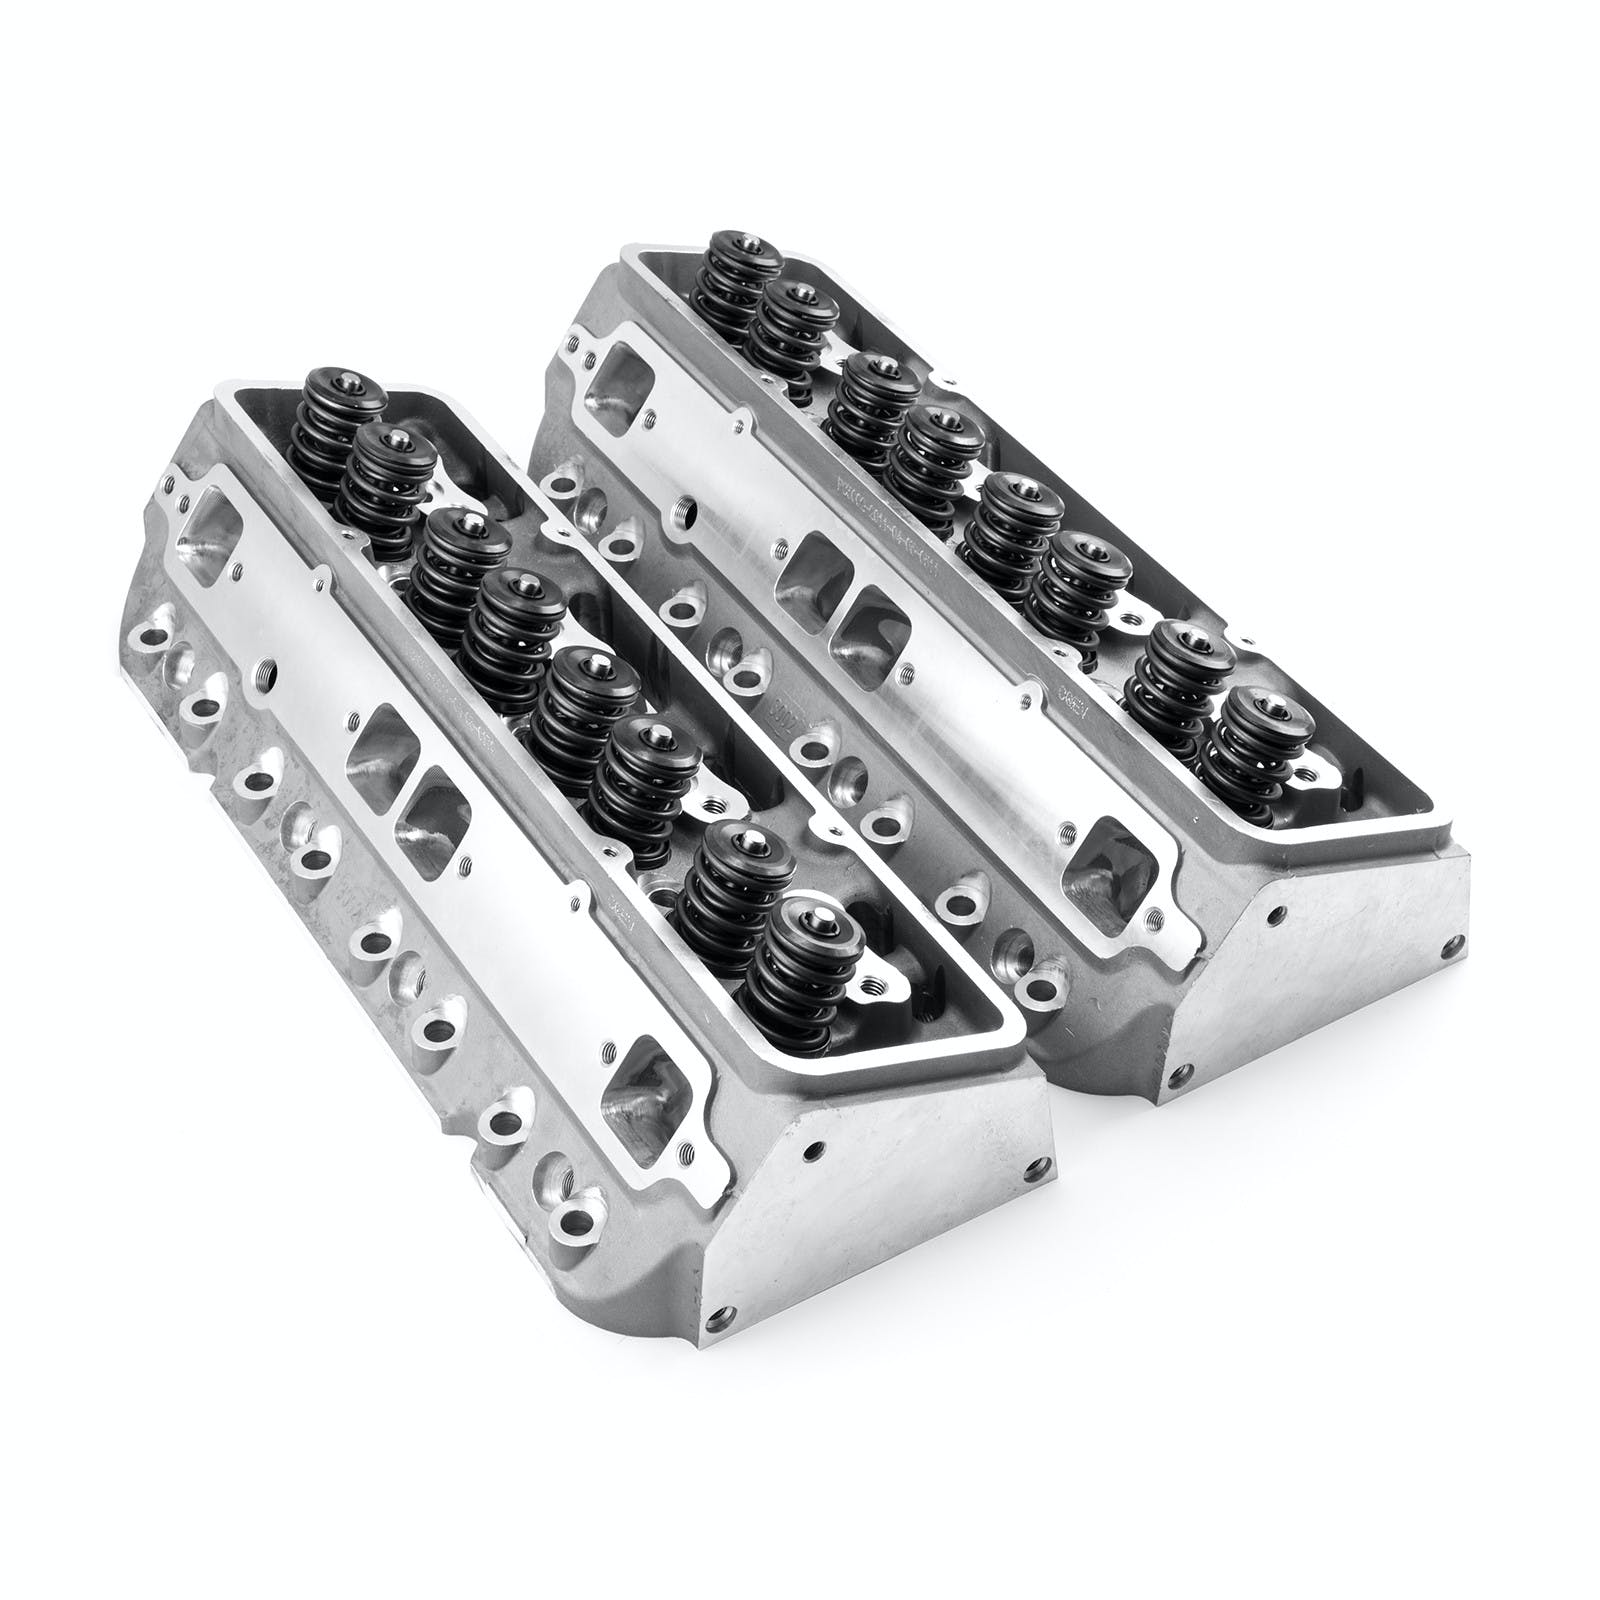 Speedmaster PCE281.2013 217cc 68cc Angle CNC Solid-FT Complete Aluminum Cylinder Heads